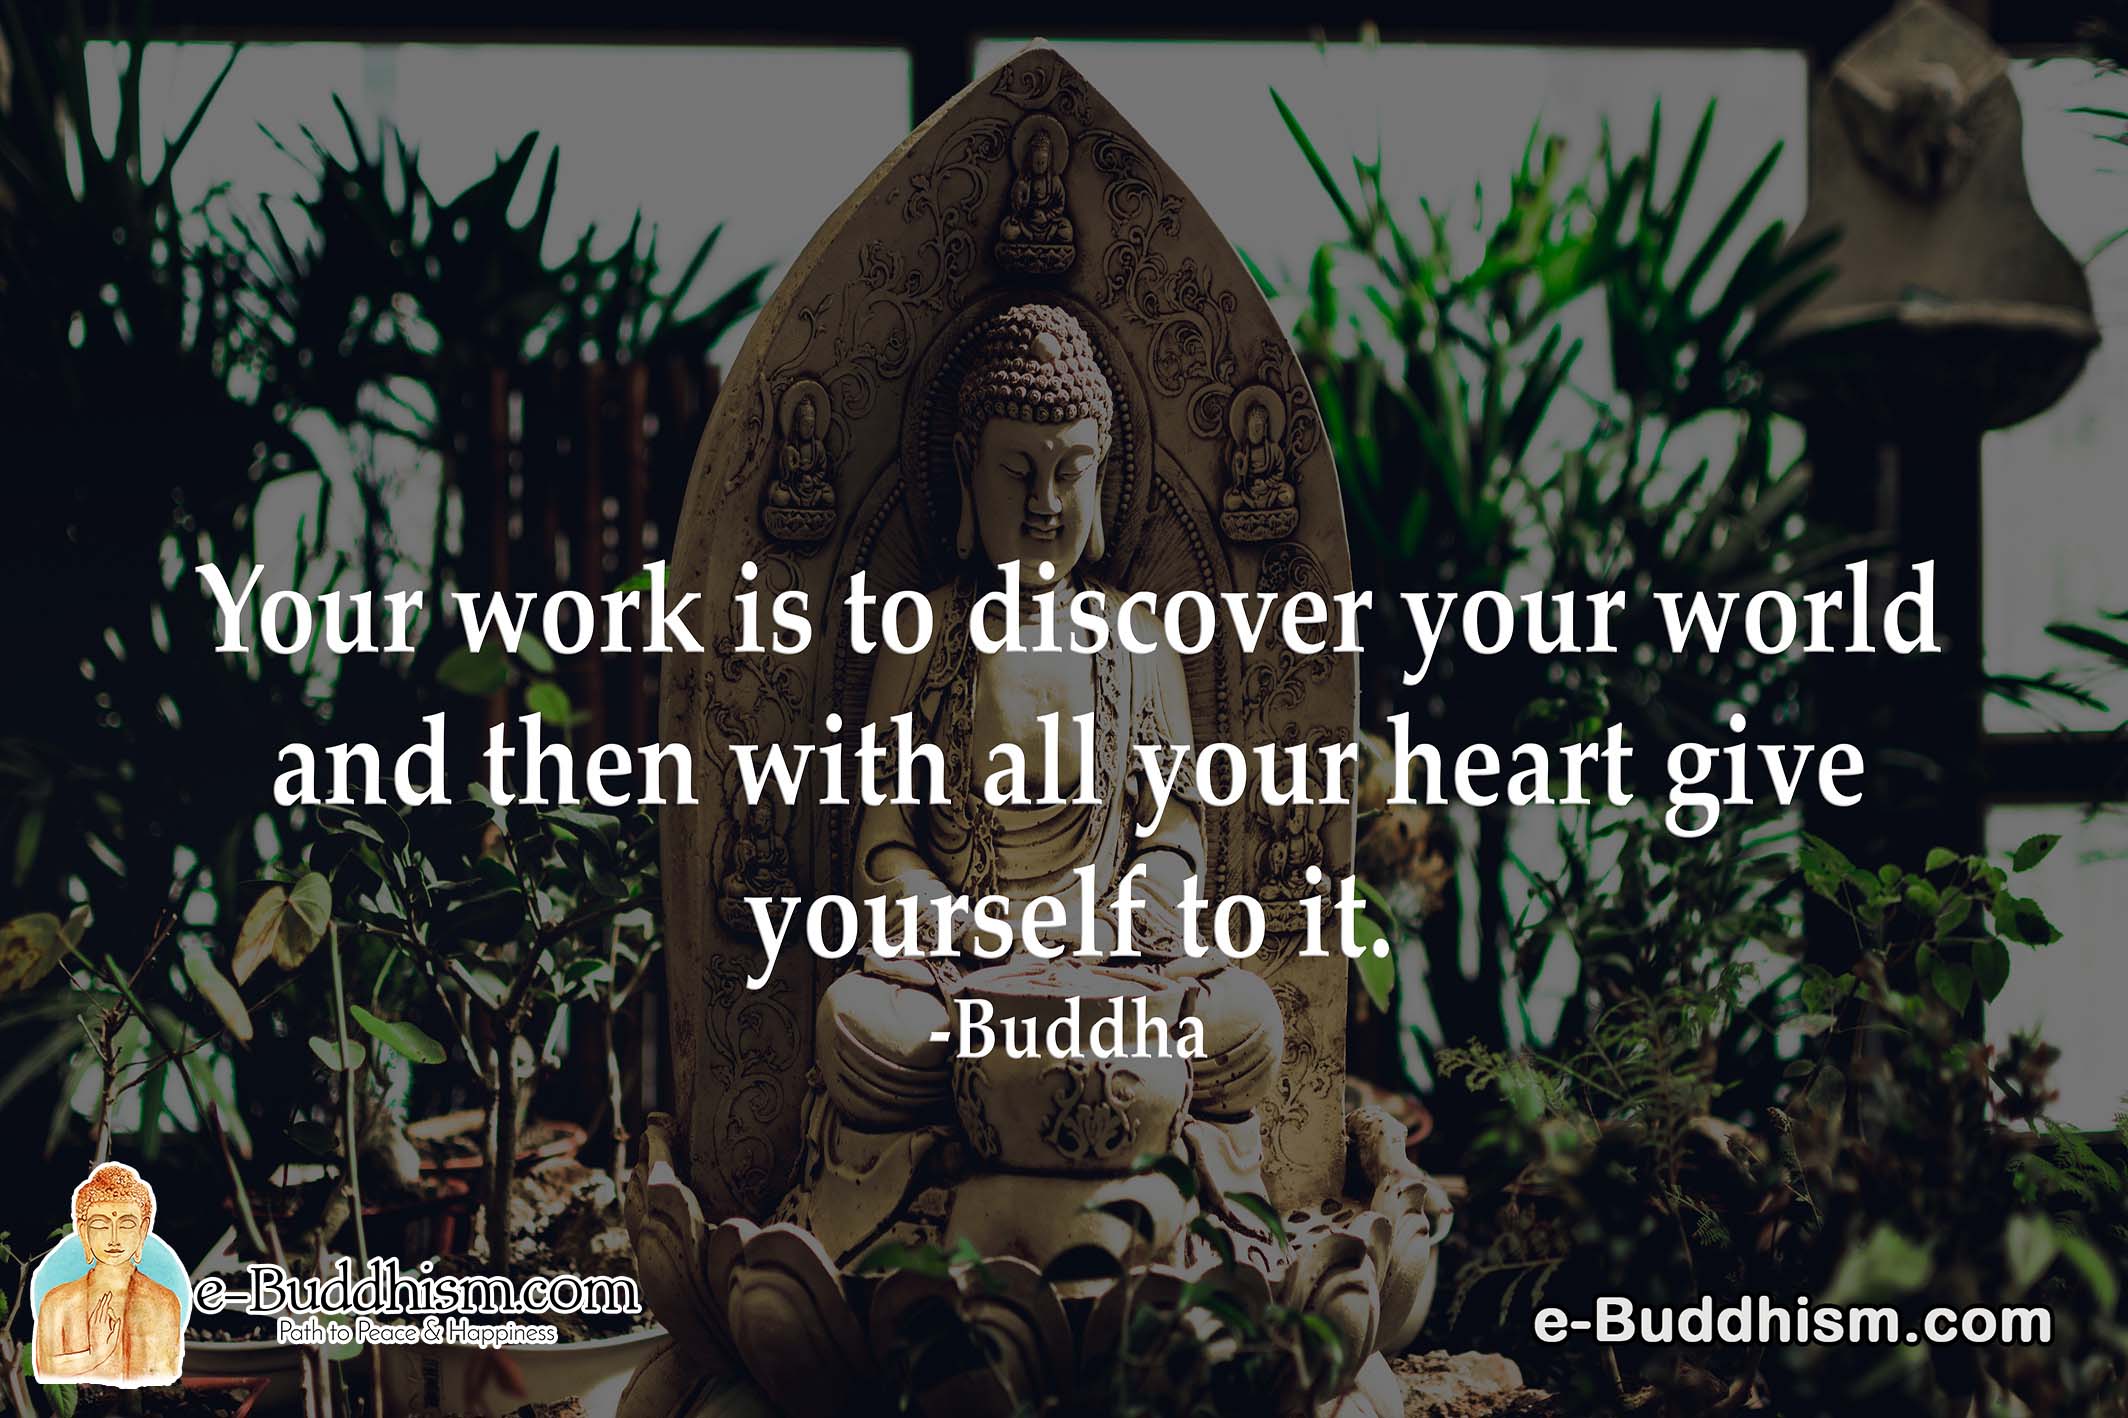 Your work is to discover your world and then with all your heart give yourself to it. -Buddha